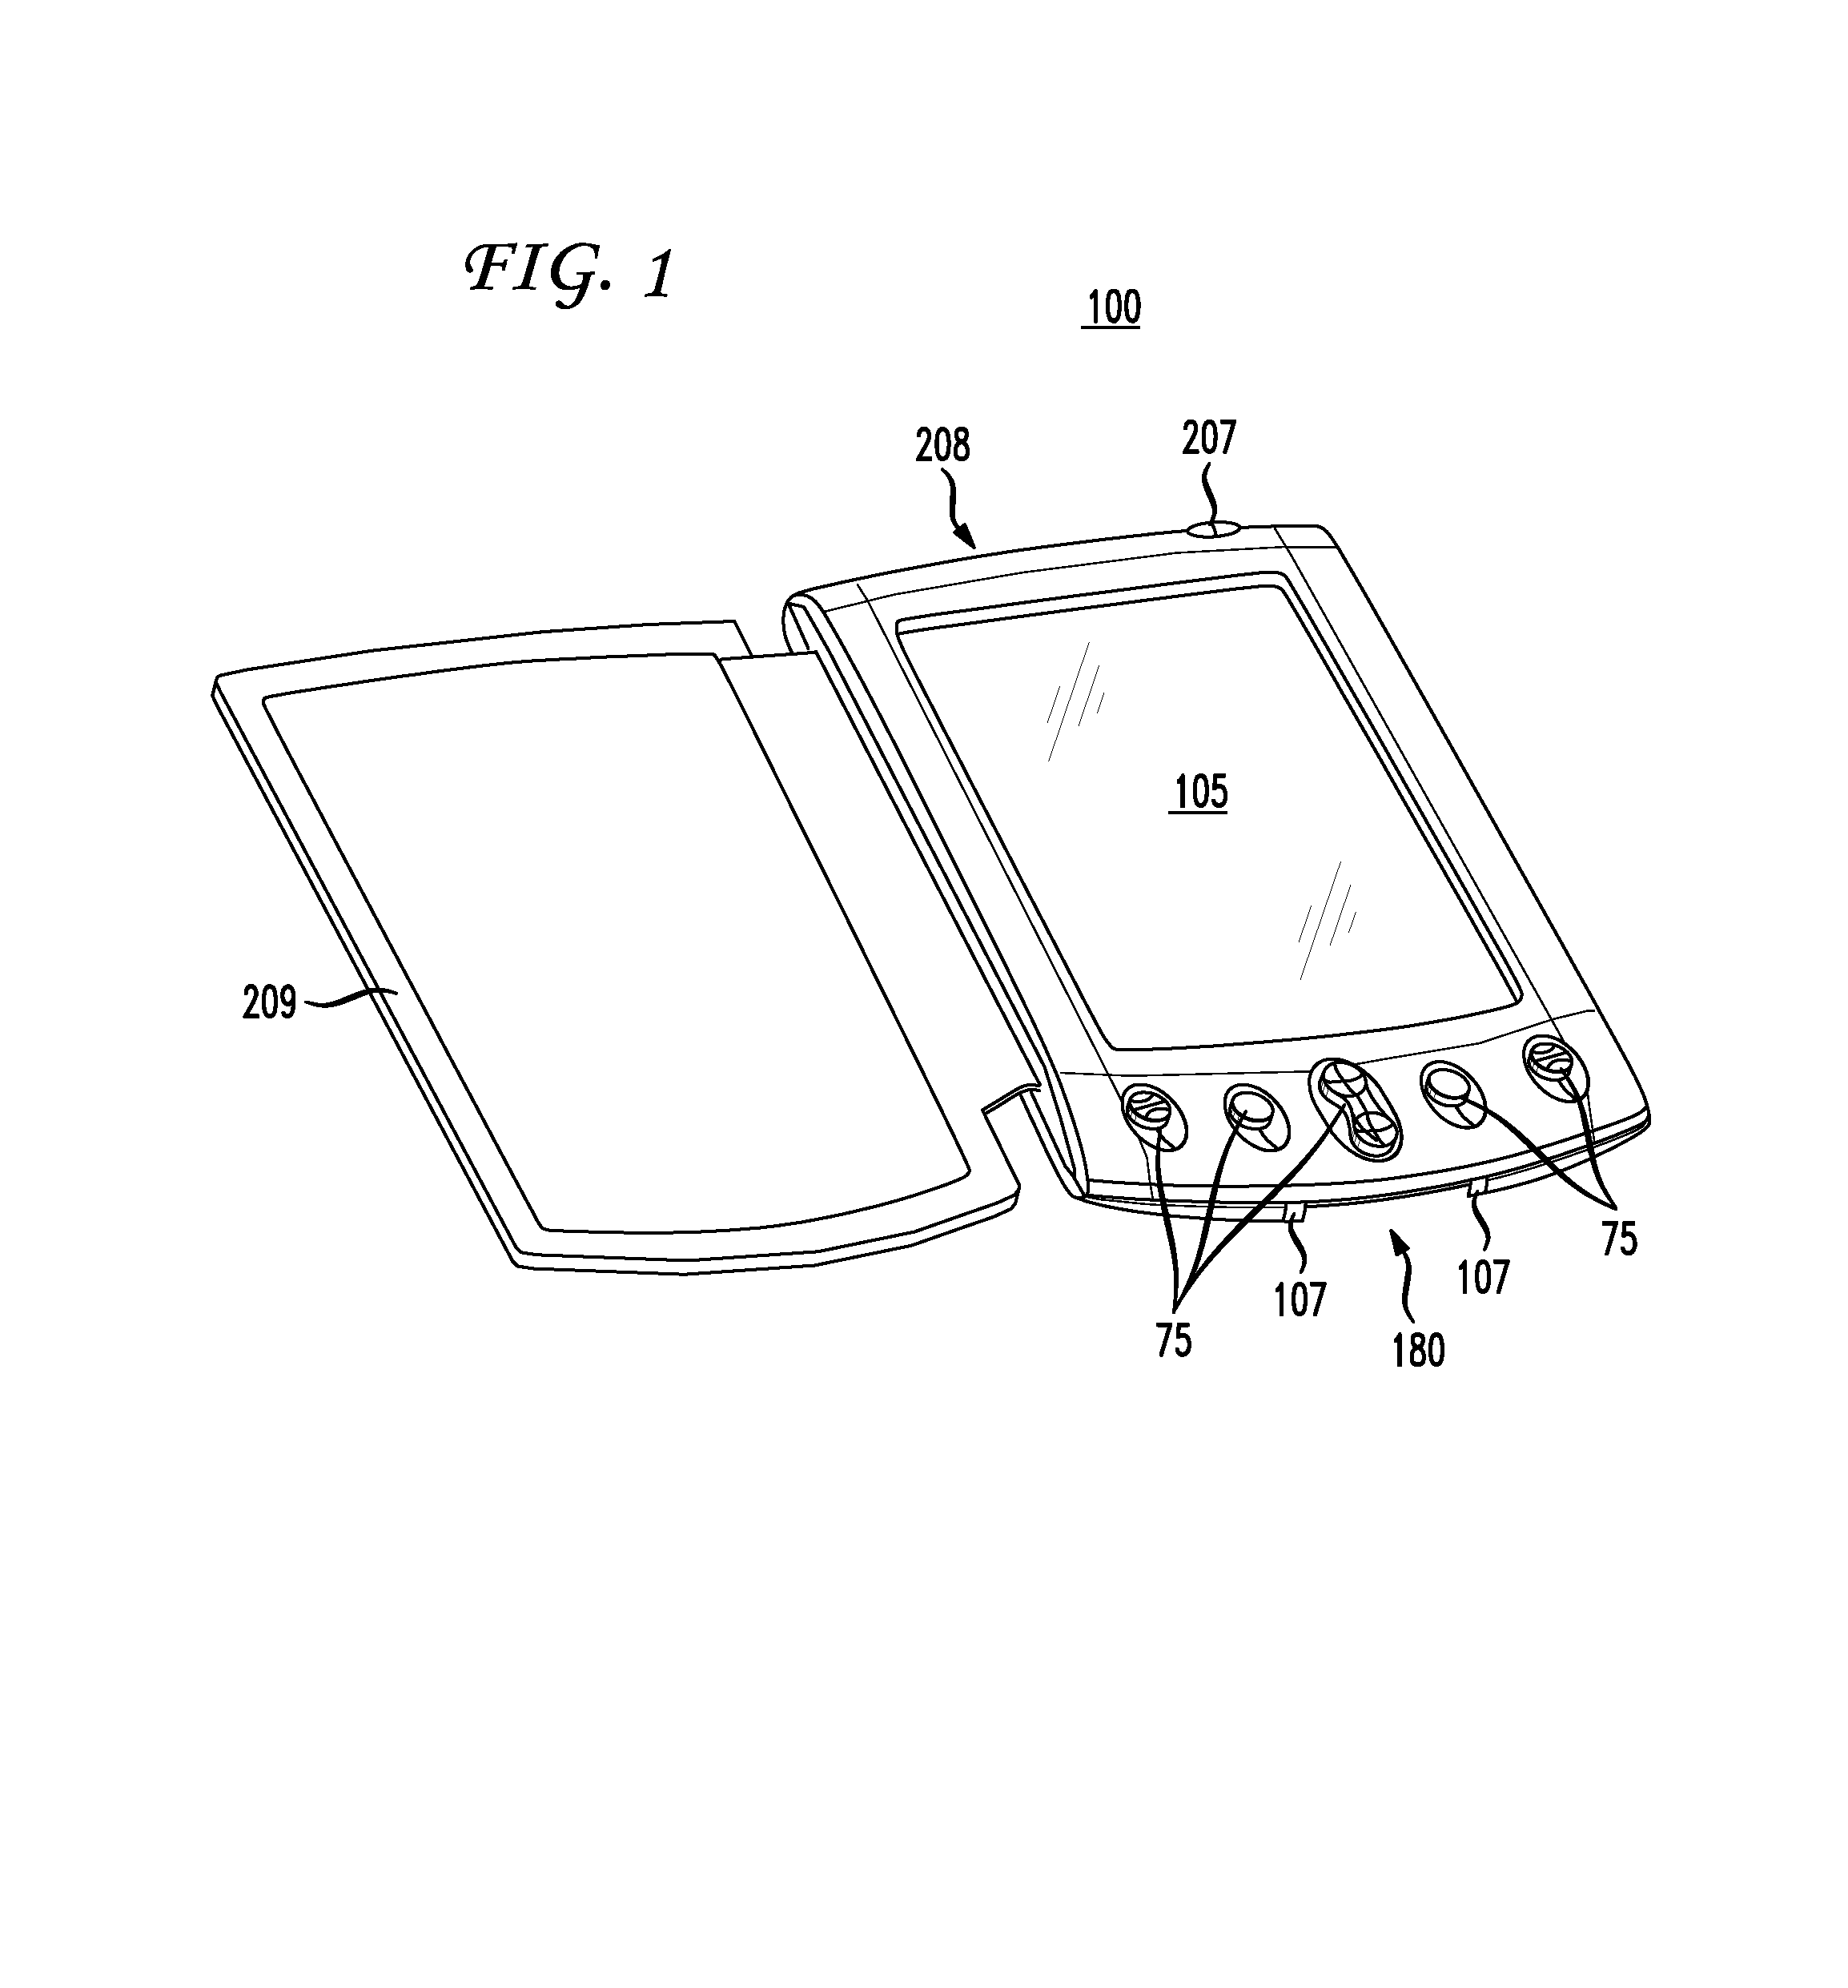 Security method and apparatus for controlling the data exchange on handheld computers